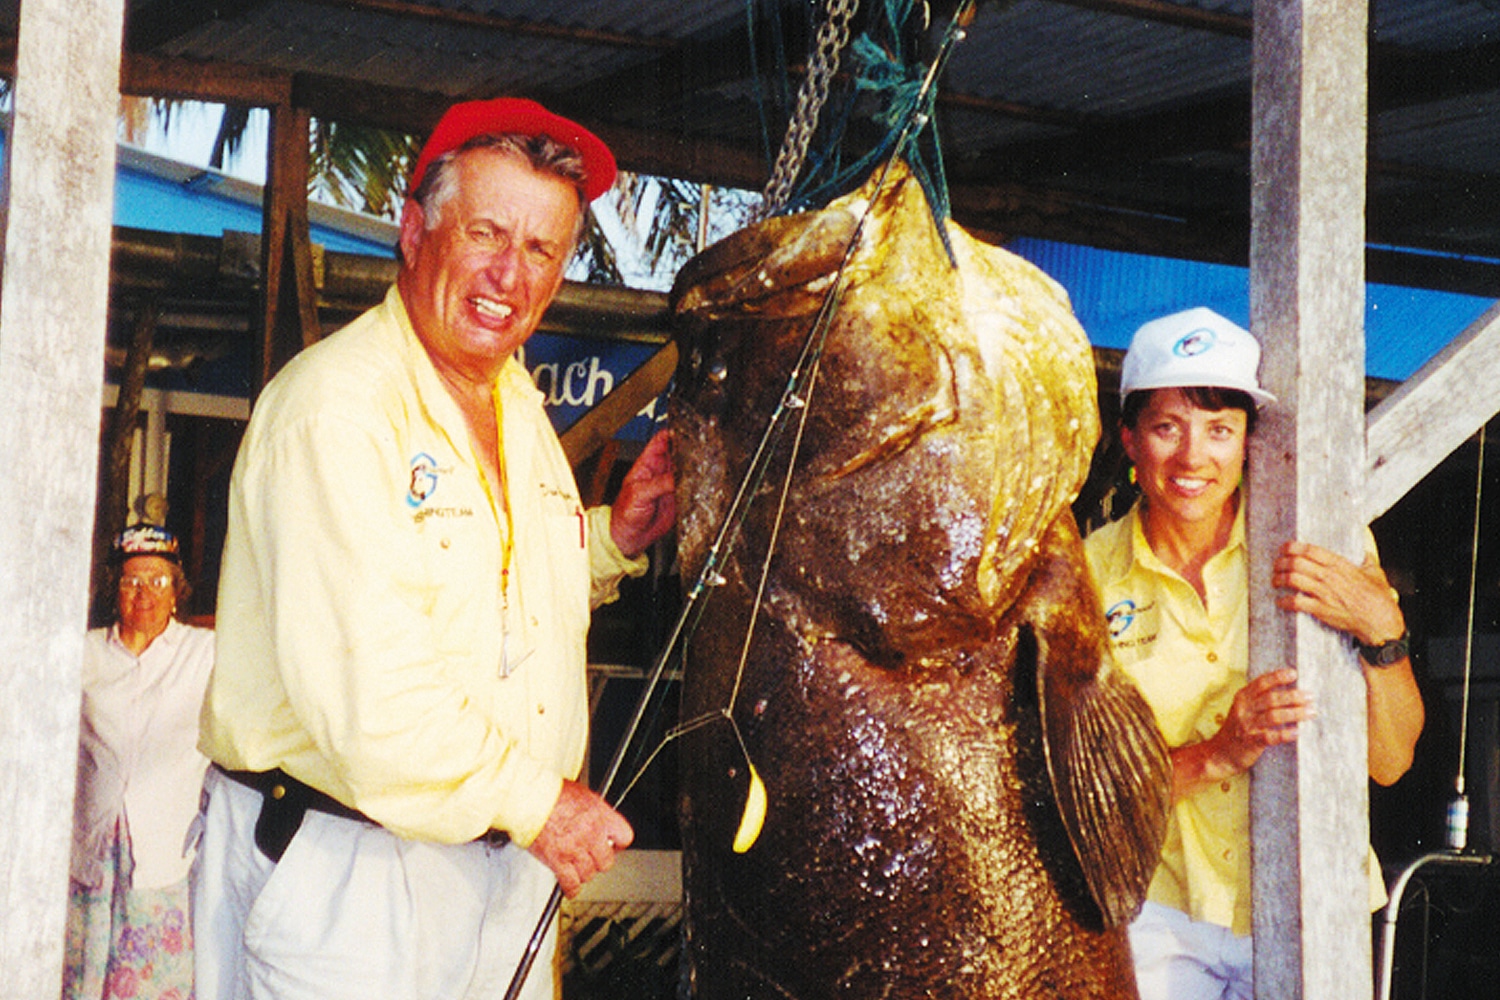 Catching a World Record Intentional or Fluke? - MidWest Outdoors